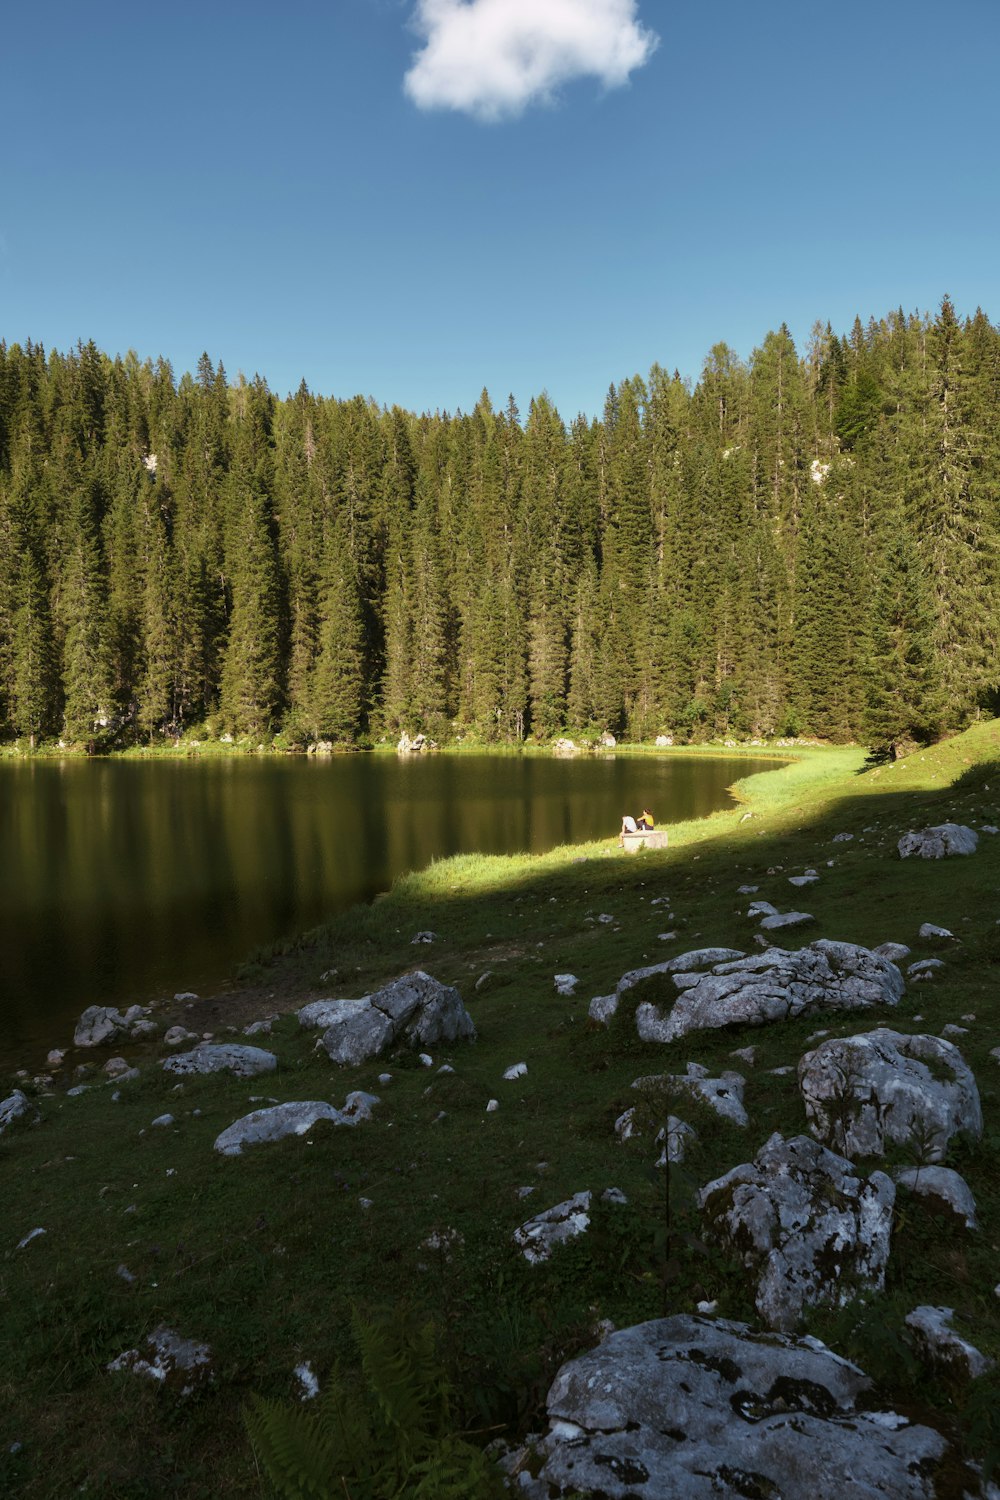 a grassy field next to a lake surrounded by trees